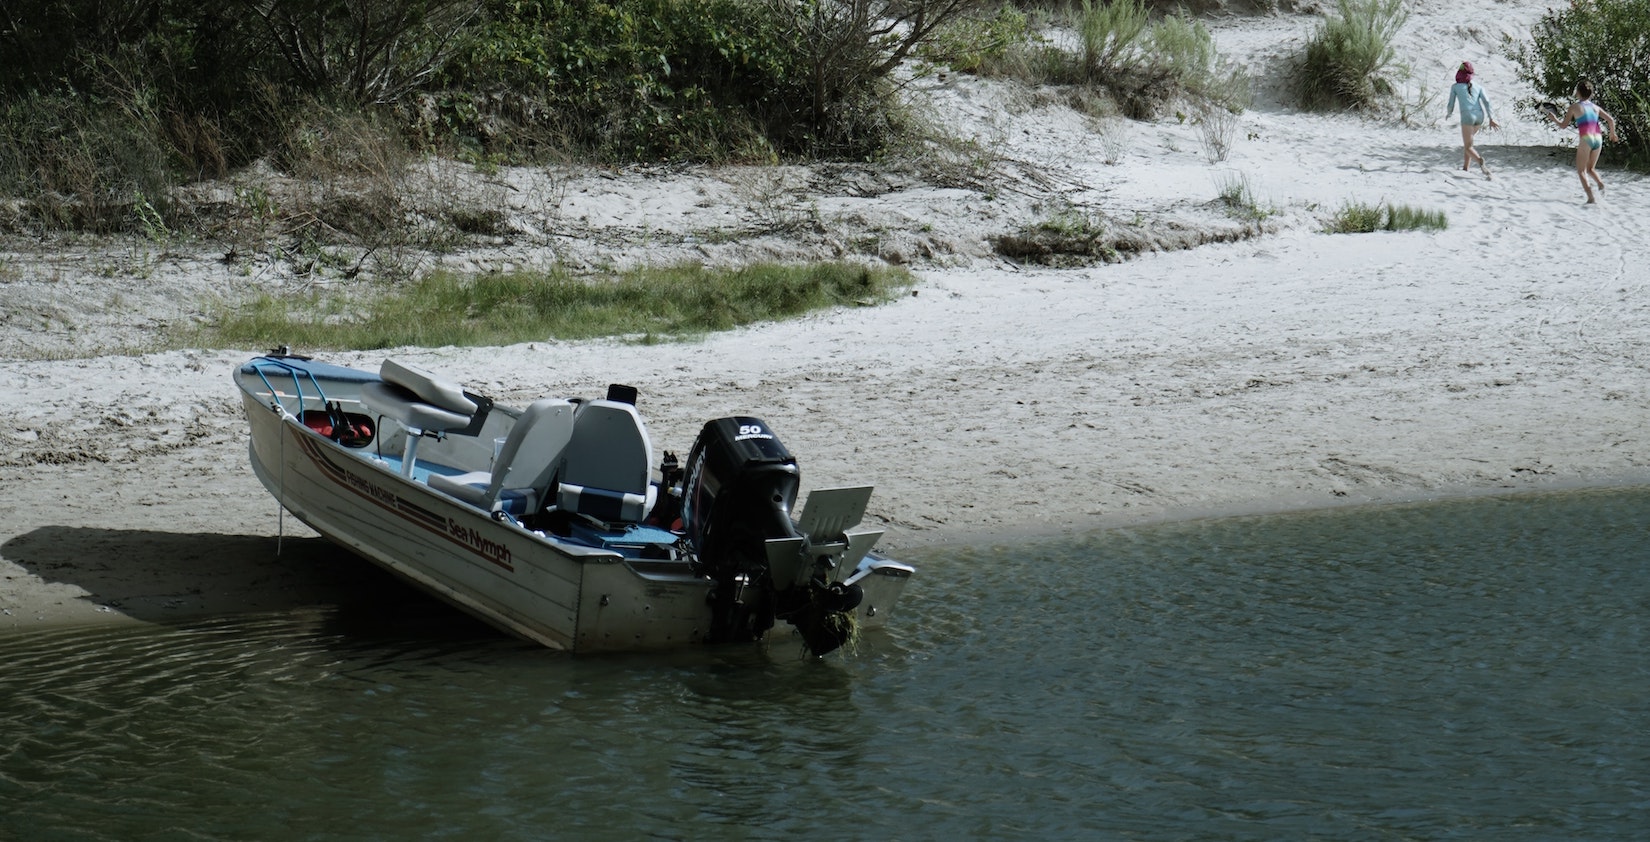 Little boat docked on a beach with two people in background